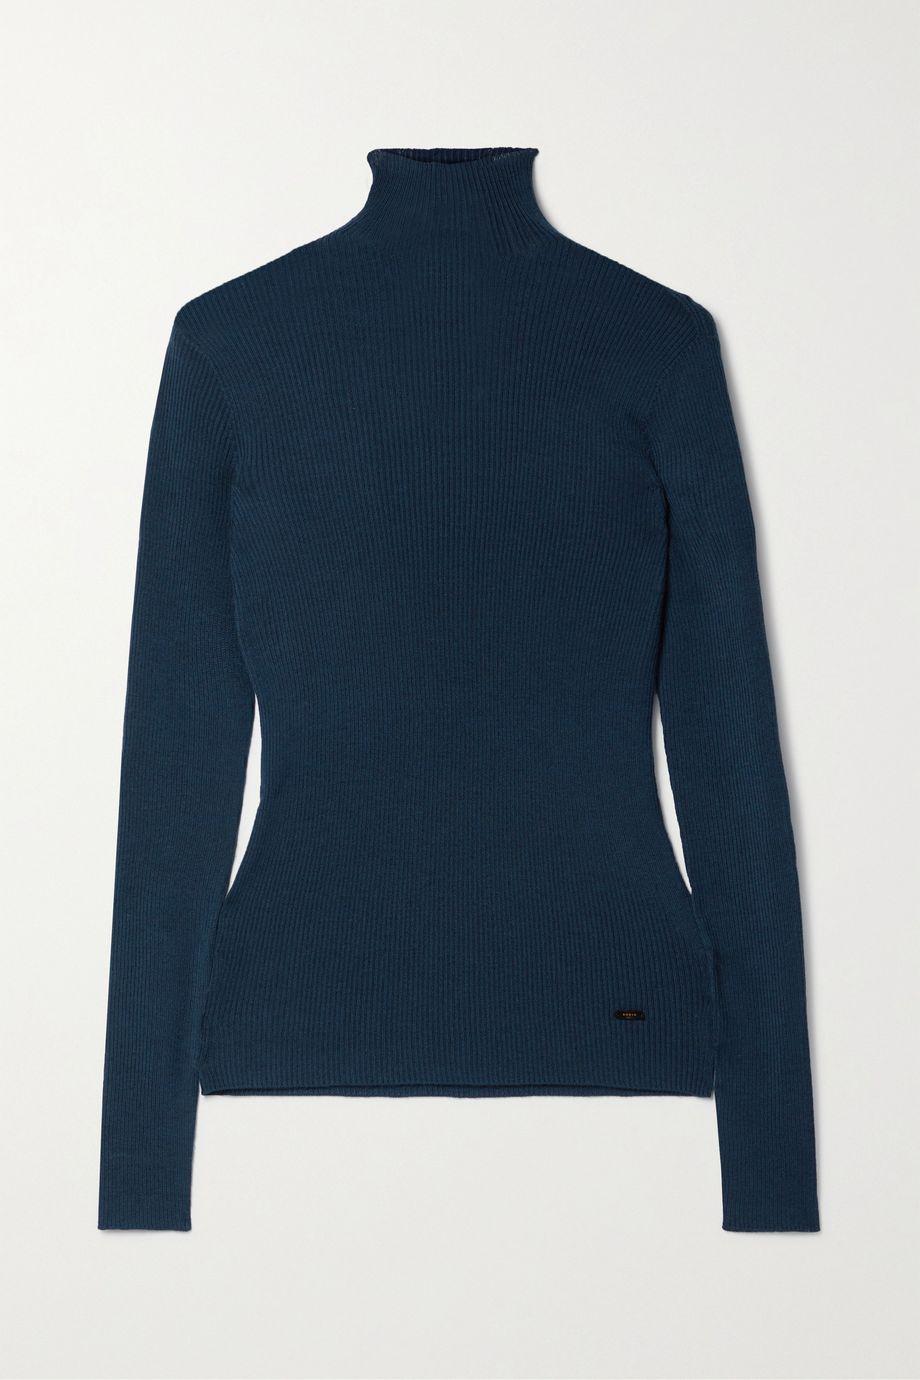 Ribbed cashmere and mulberry silk-blend turtleneck sweater by AKRIS